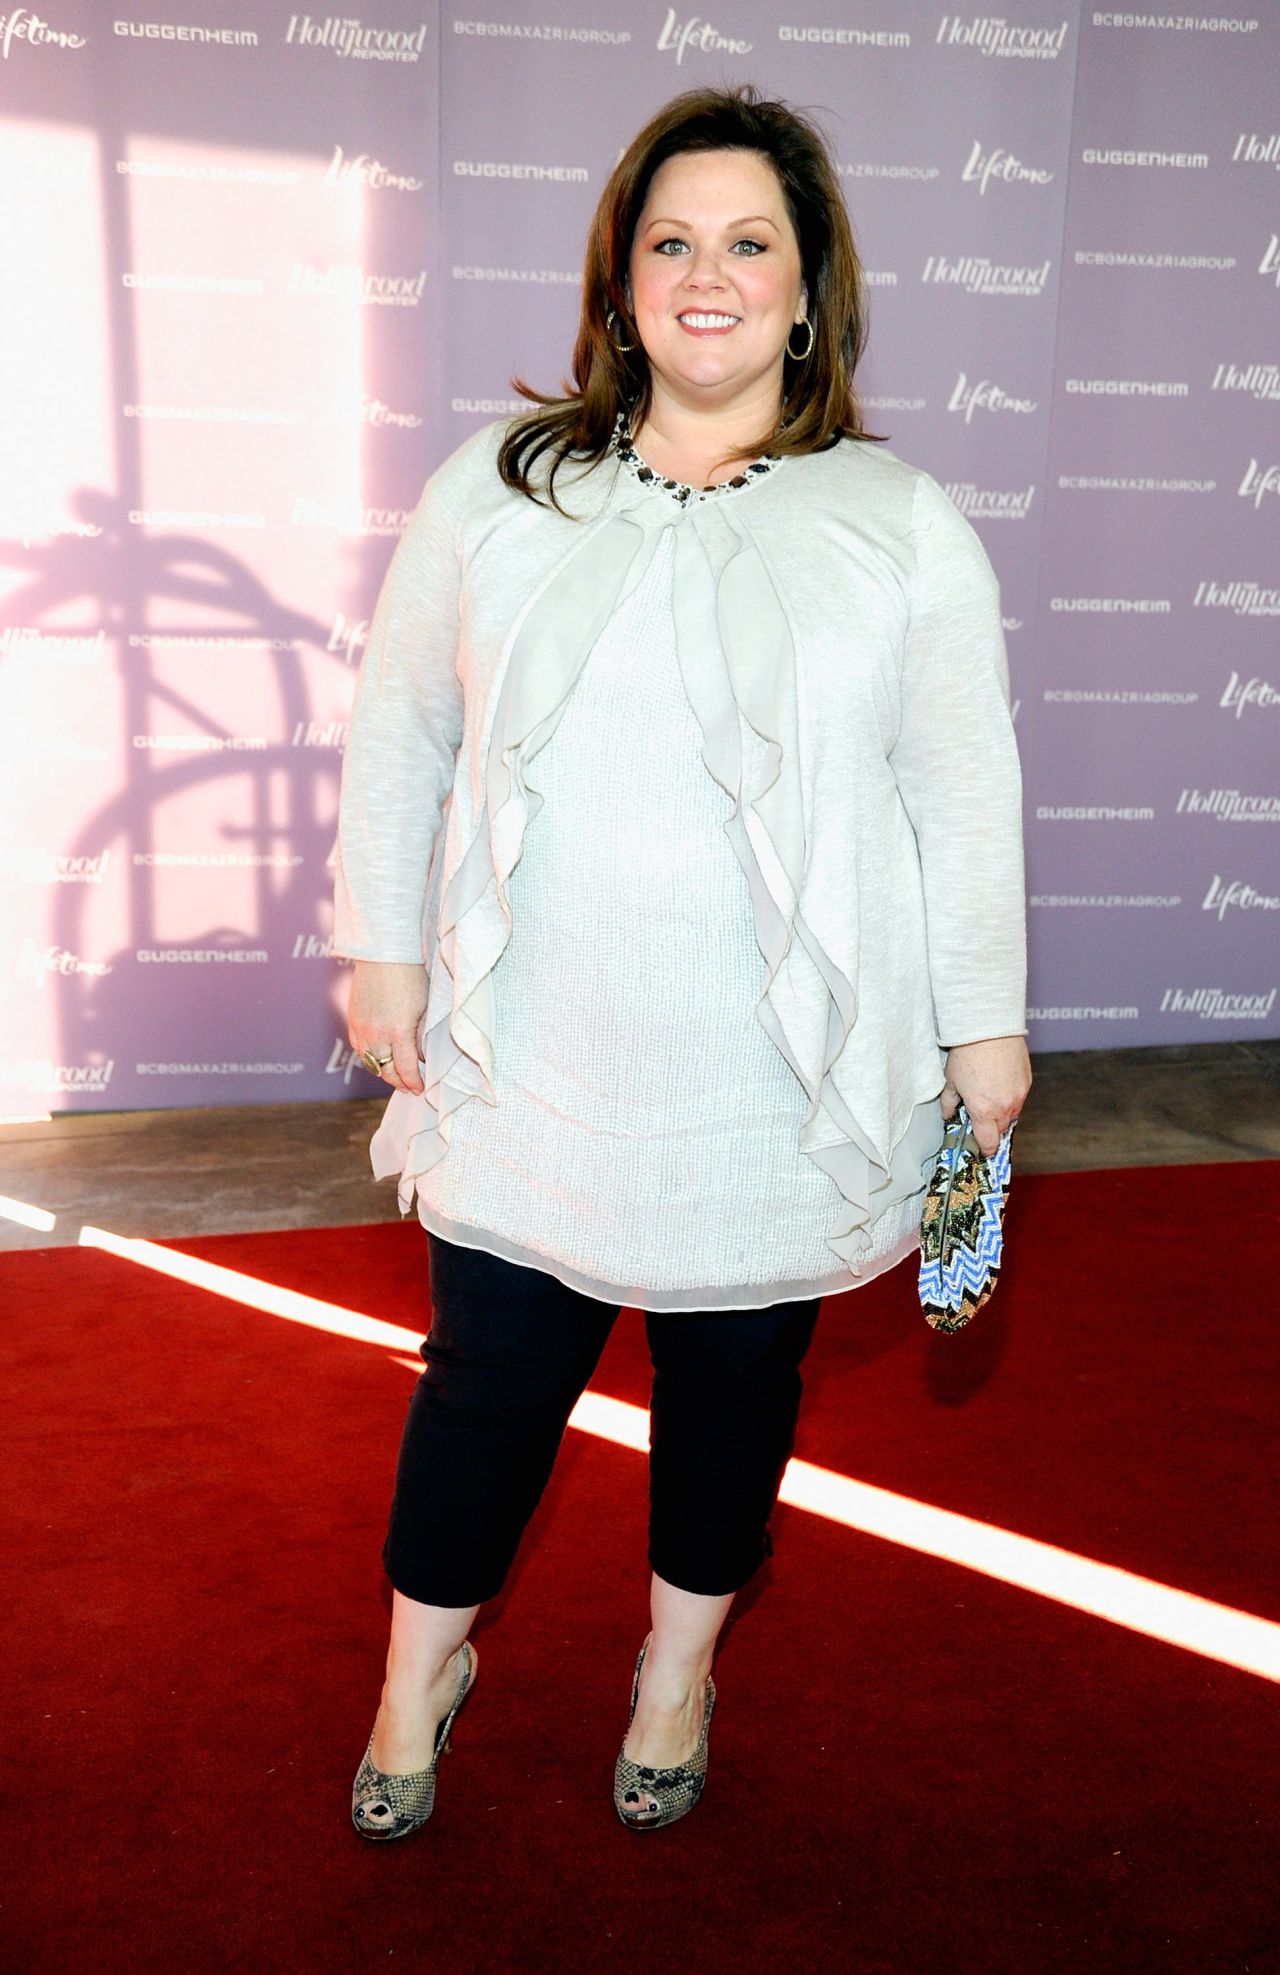 Melissa McCarthy is more of a wild card, considering that she doesn't have any experience hosting. But with the dedication she's brought to her stints leading "Saturday Night Live" and her known fearlessness when it comes to physical comedy, we imagine a McCarthy-led hour would be a riot. 